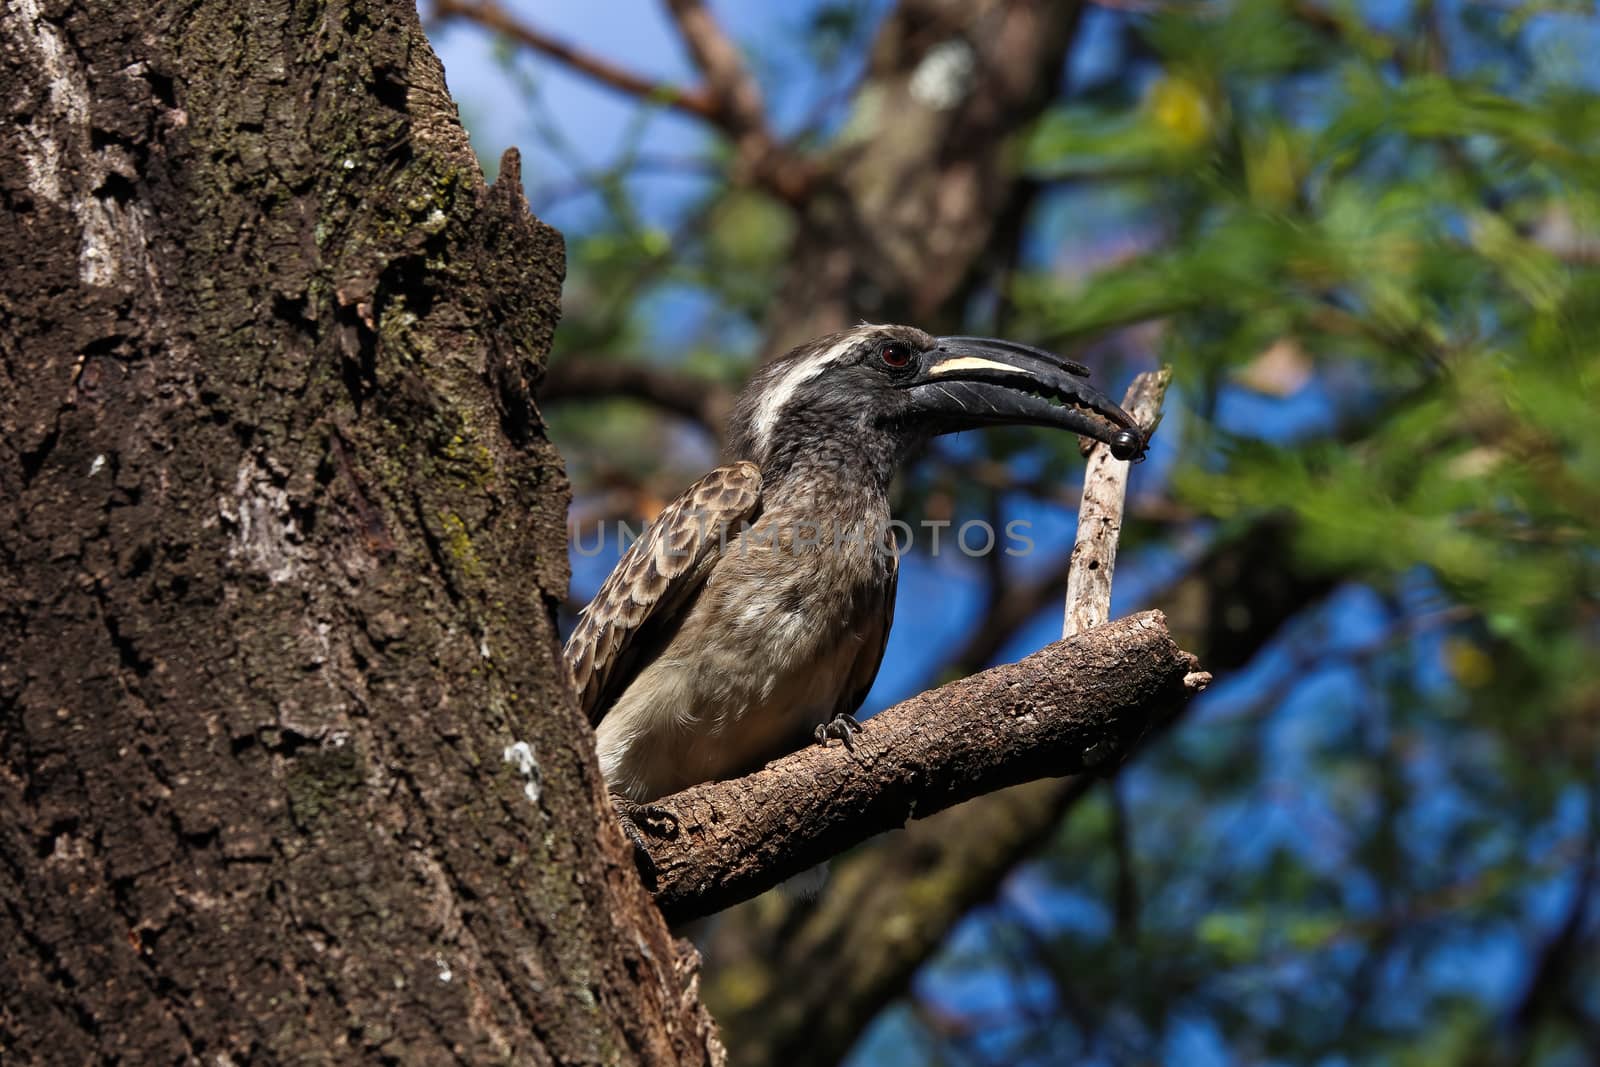 An African grey hornbill bird (Lophoceros nasutus) with caught insect to give to his partner in a nearby hidden nest, Pretoria, South Africa